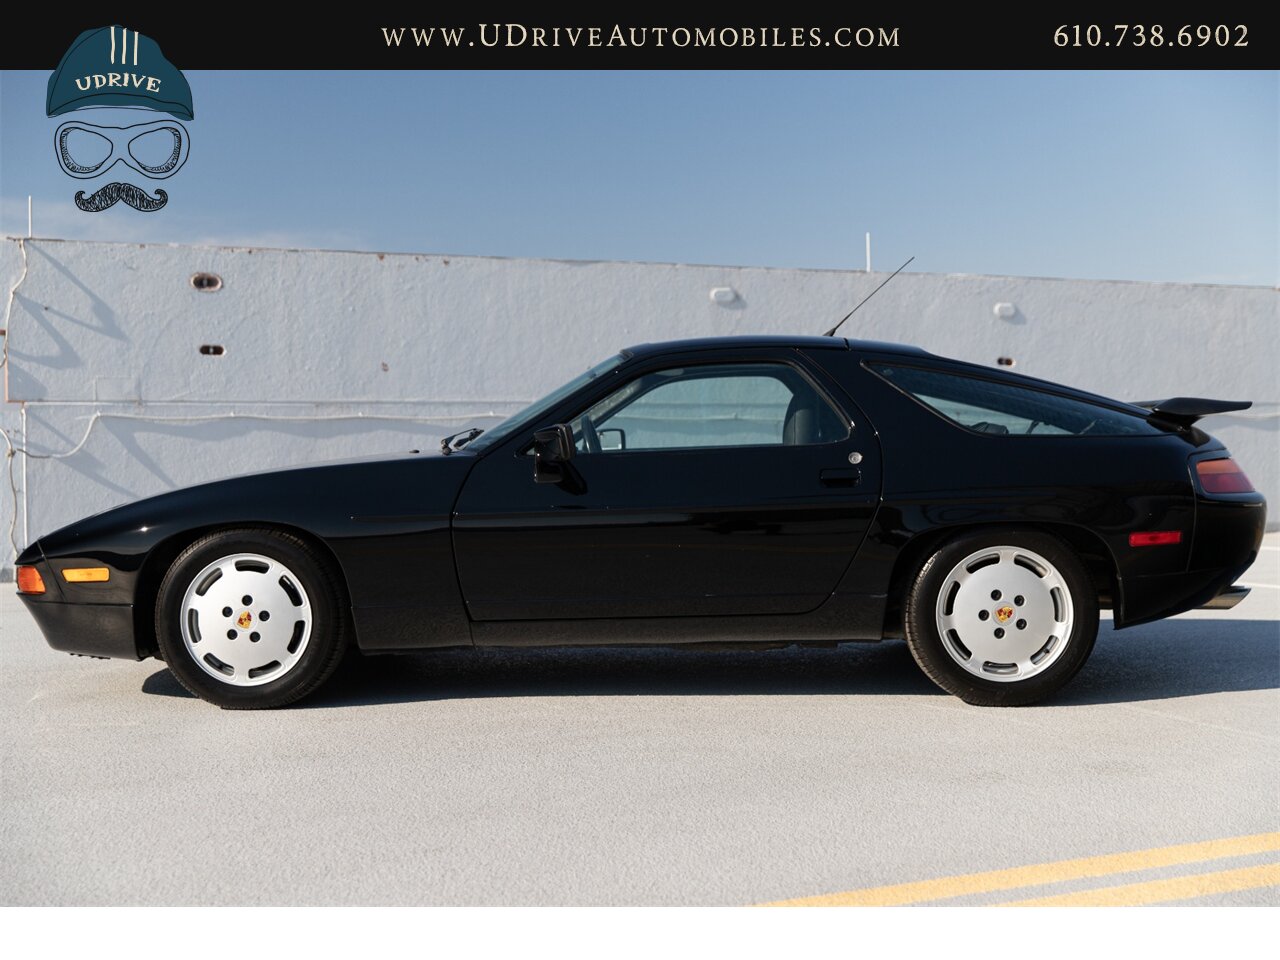 1990 Porsche 928 S4 $58k in Service History Since 2014   - Photo 5 - West Chester, PA 19382